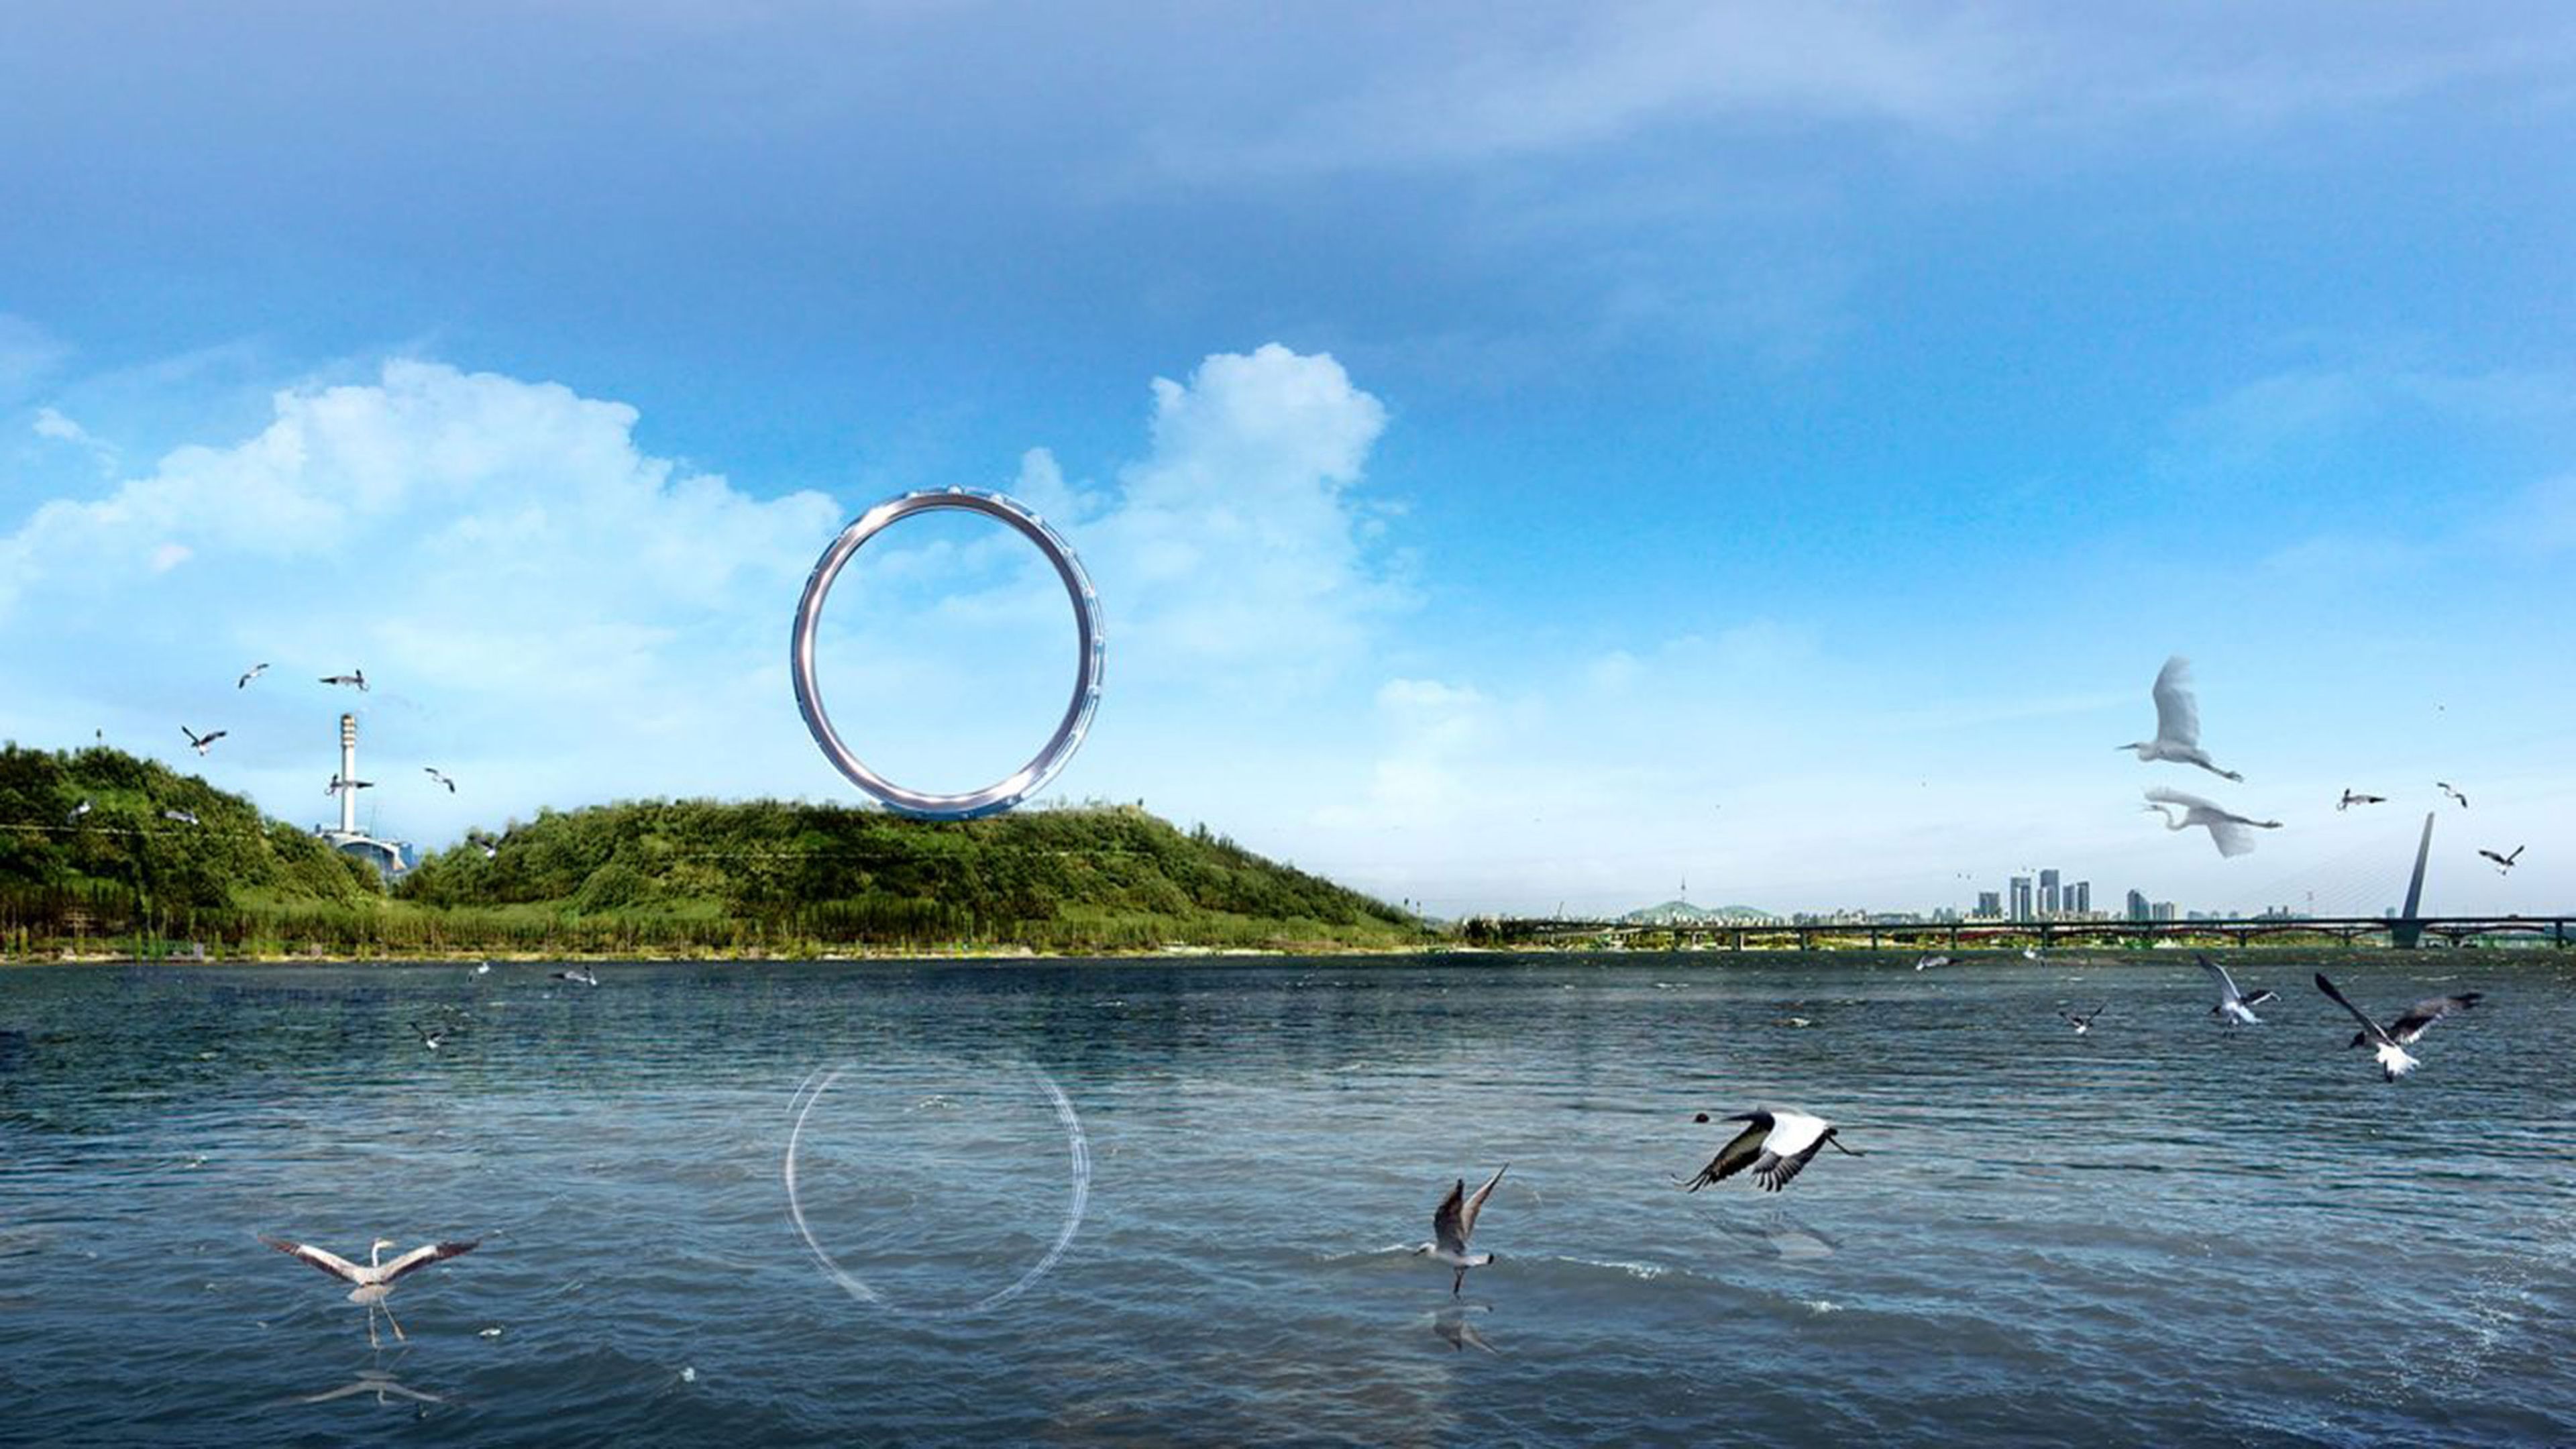 South Korea wants to build the most cutting-edge, futuristic Ferris wheel you've ever imagined by 2025